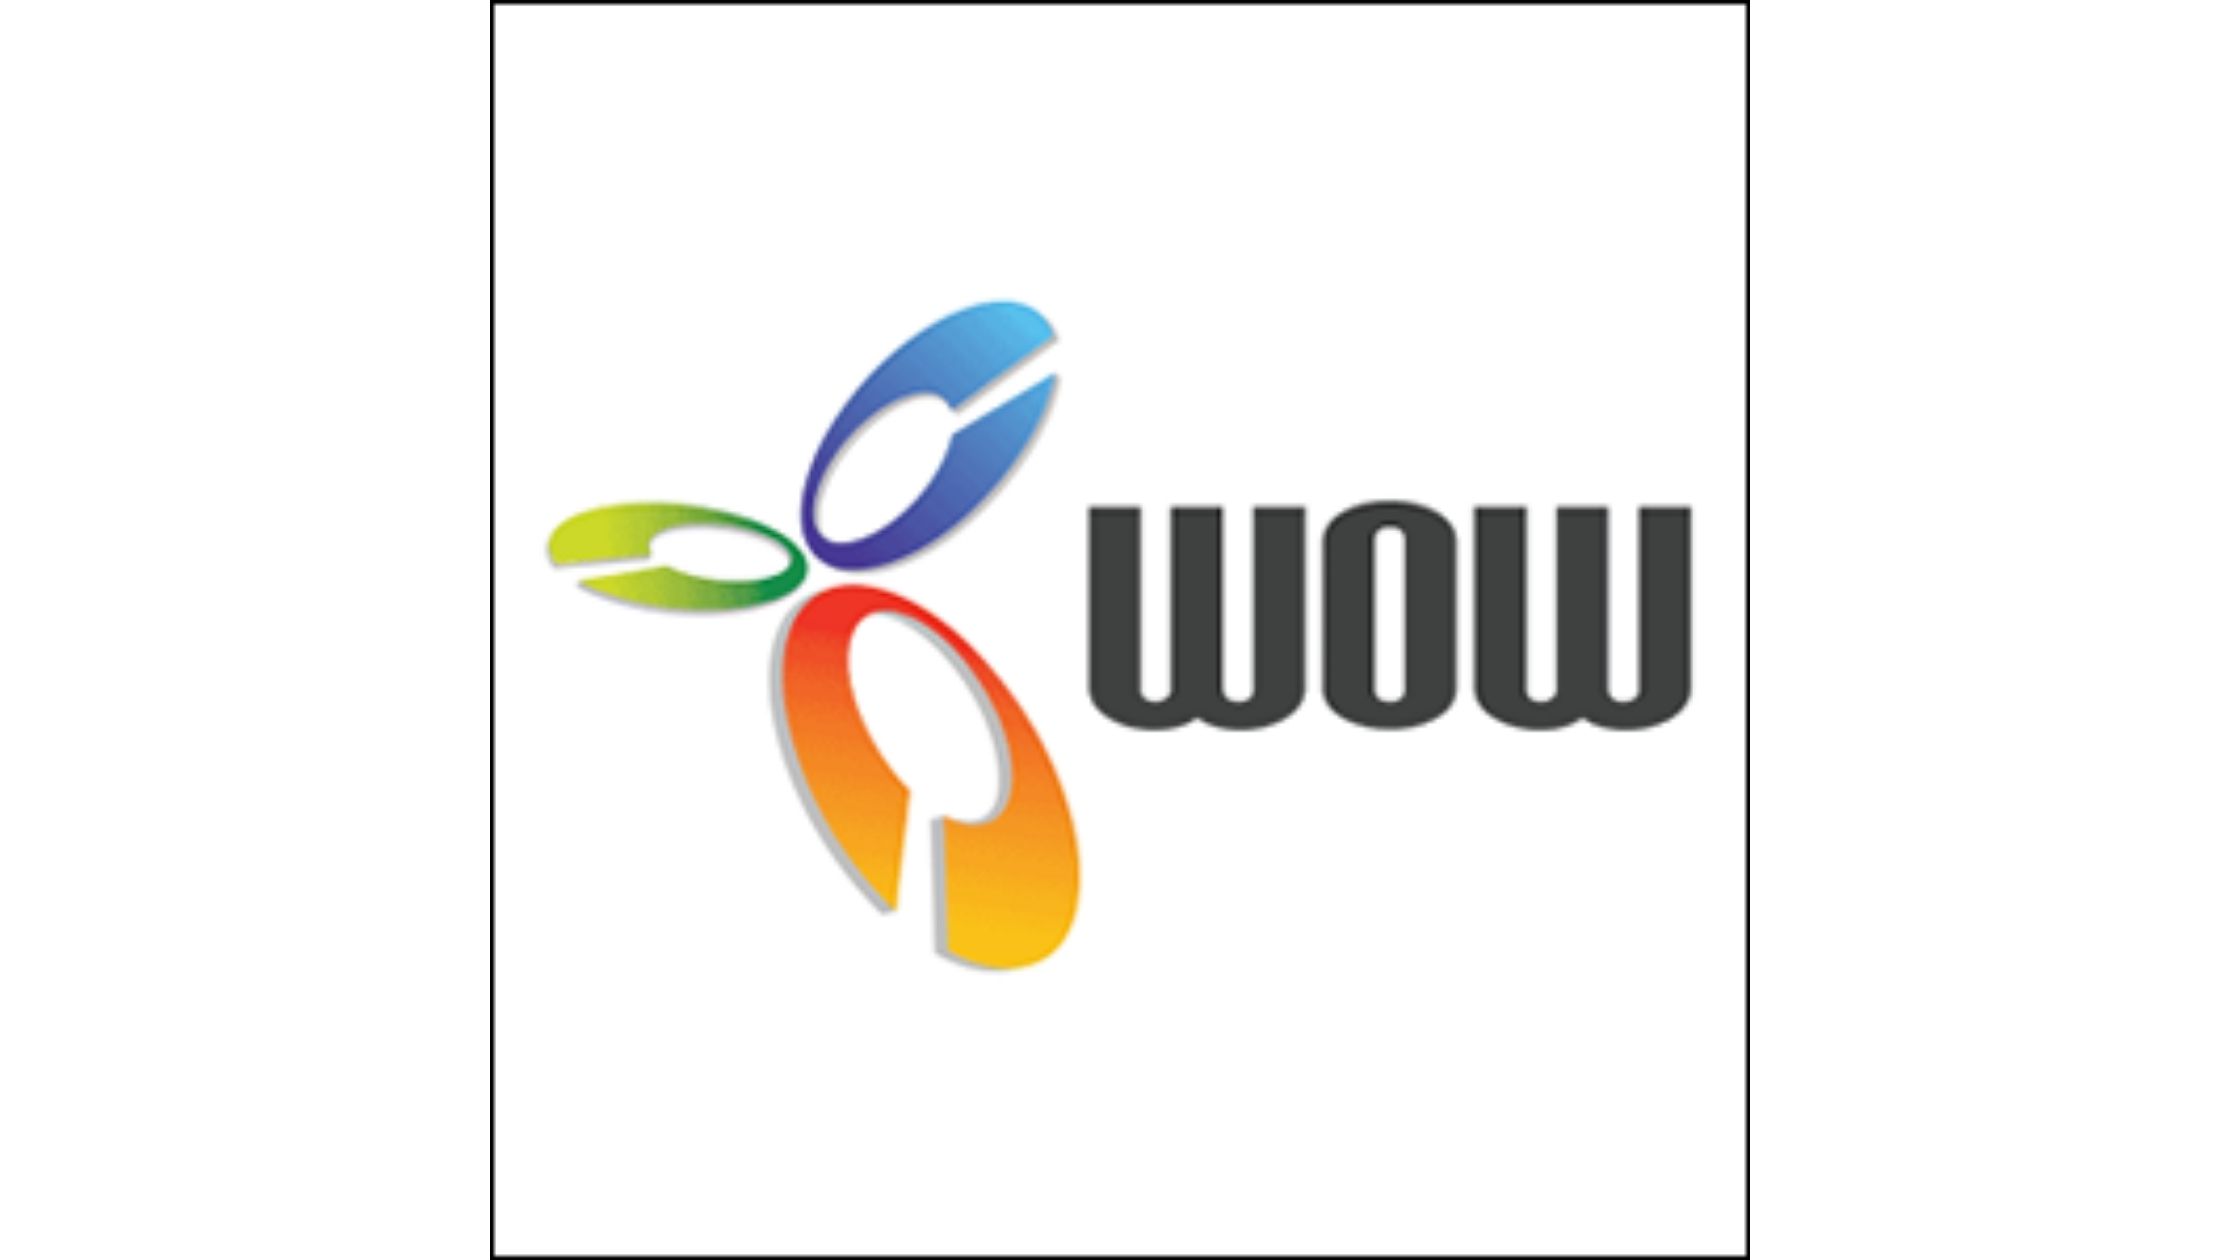 Wow Search Engine